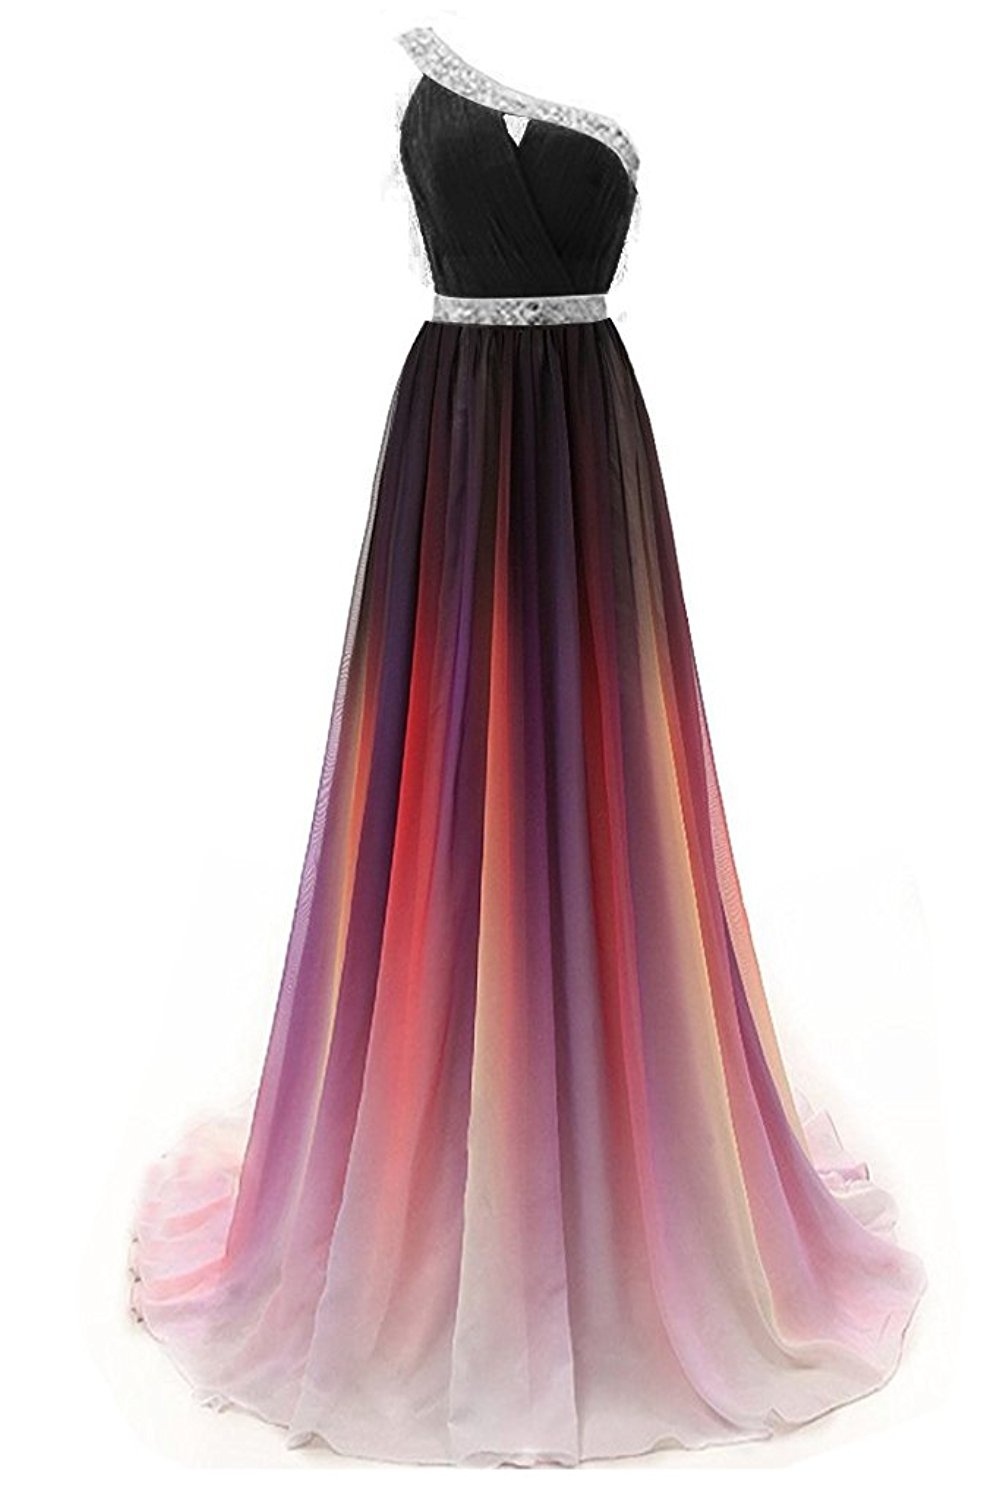 Sexy One Shoulder Beaded Gradient Long Prom Dress Plus Size Formal Evening Dress , Women Party Gowns